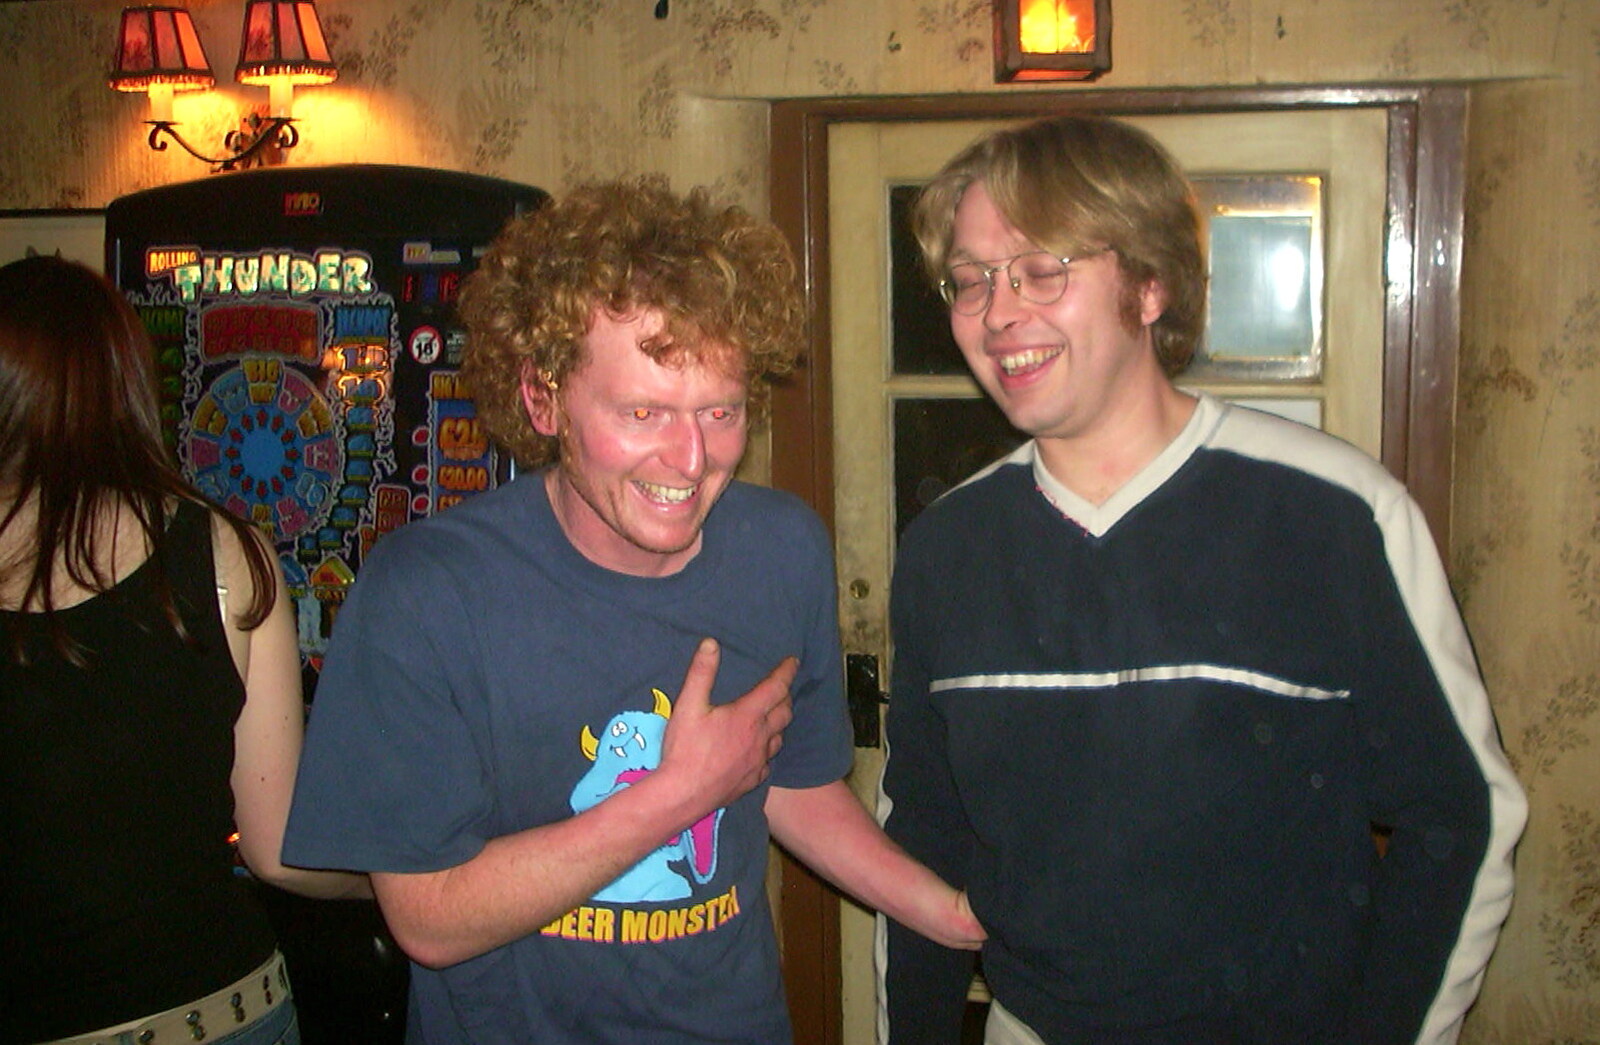 New Year's Eve at the Swan Inn, Brome, Suffolk - 31st December 2002: Wavy and Marc